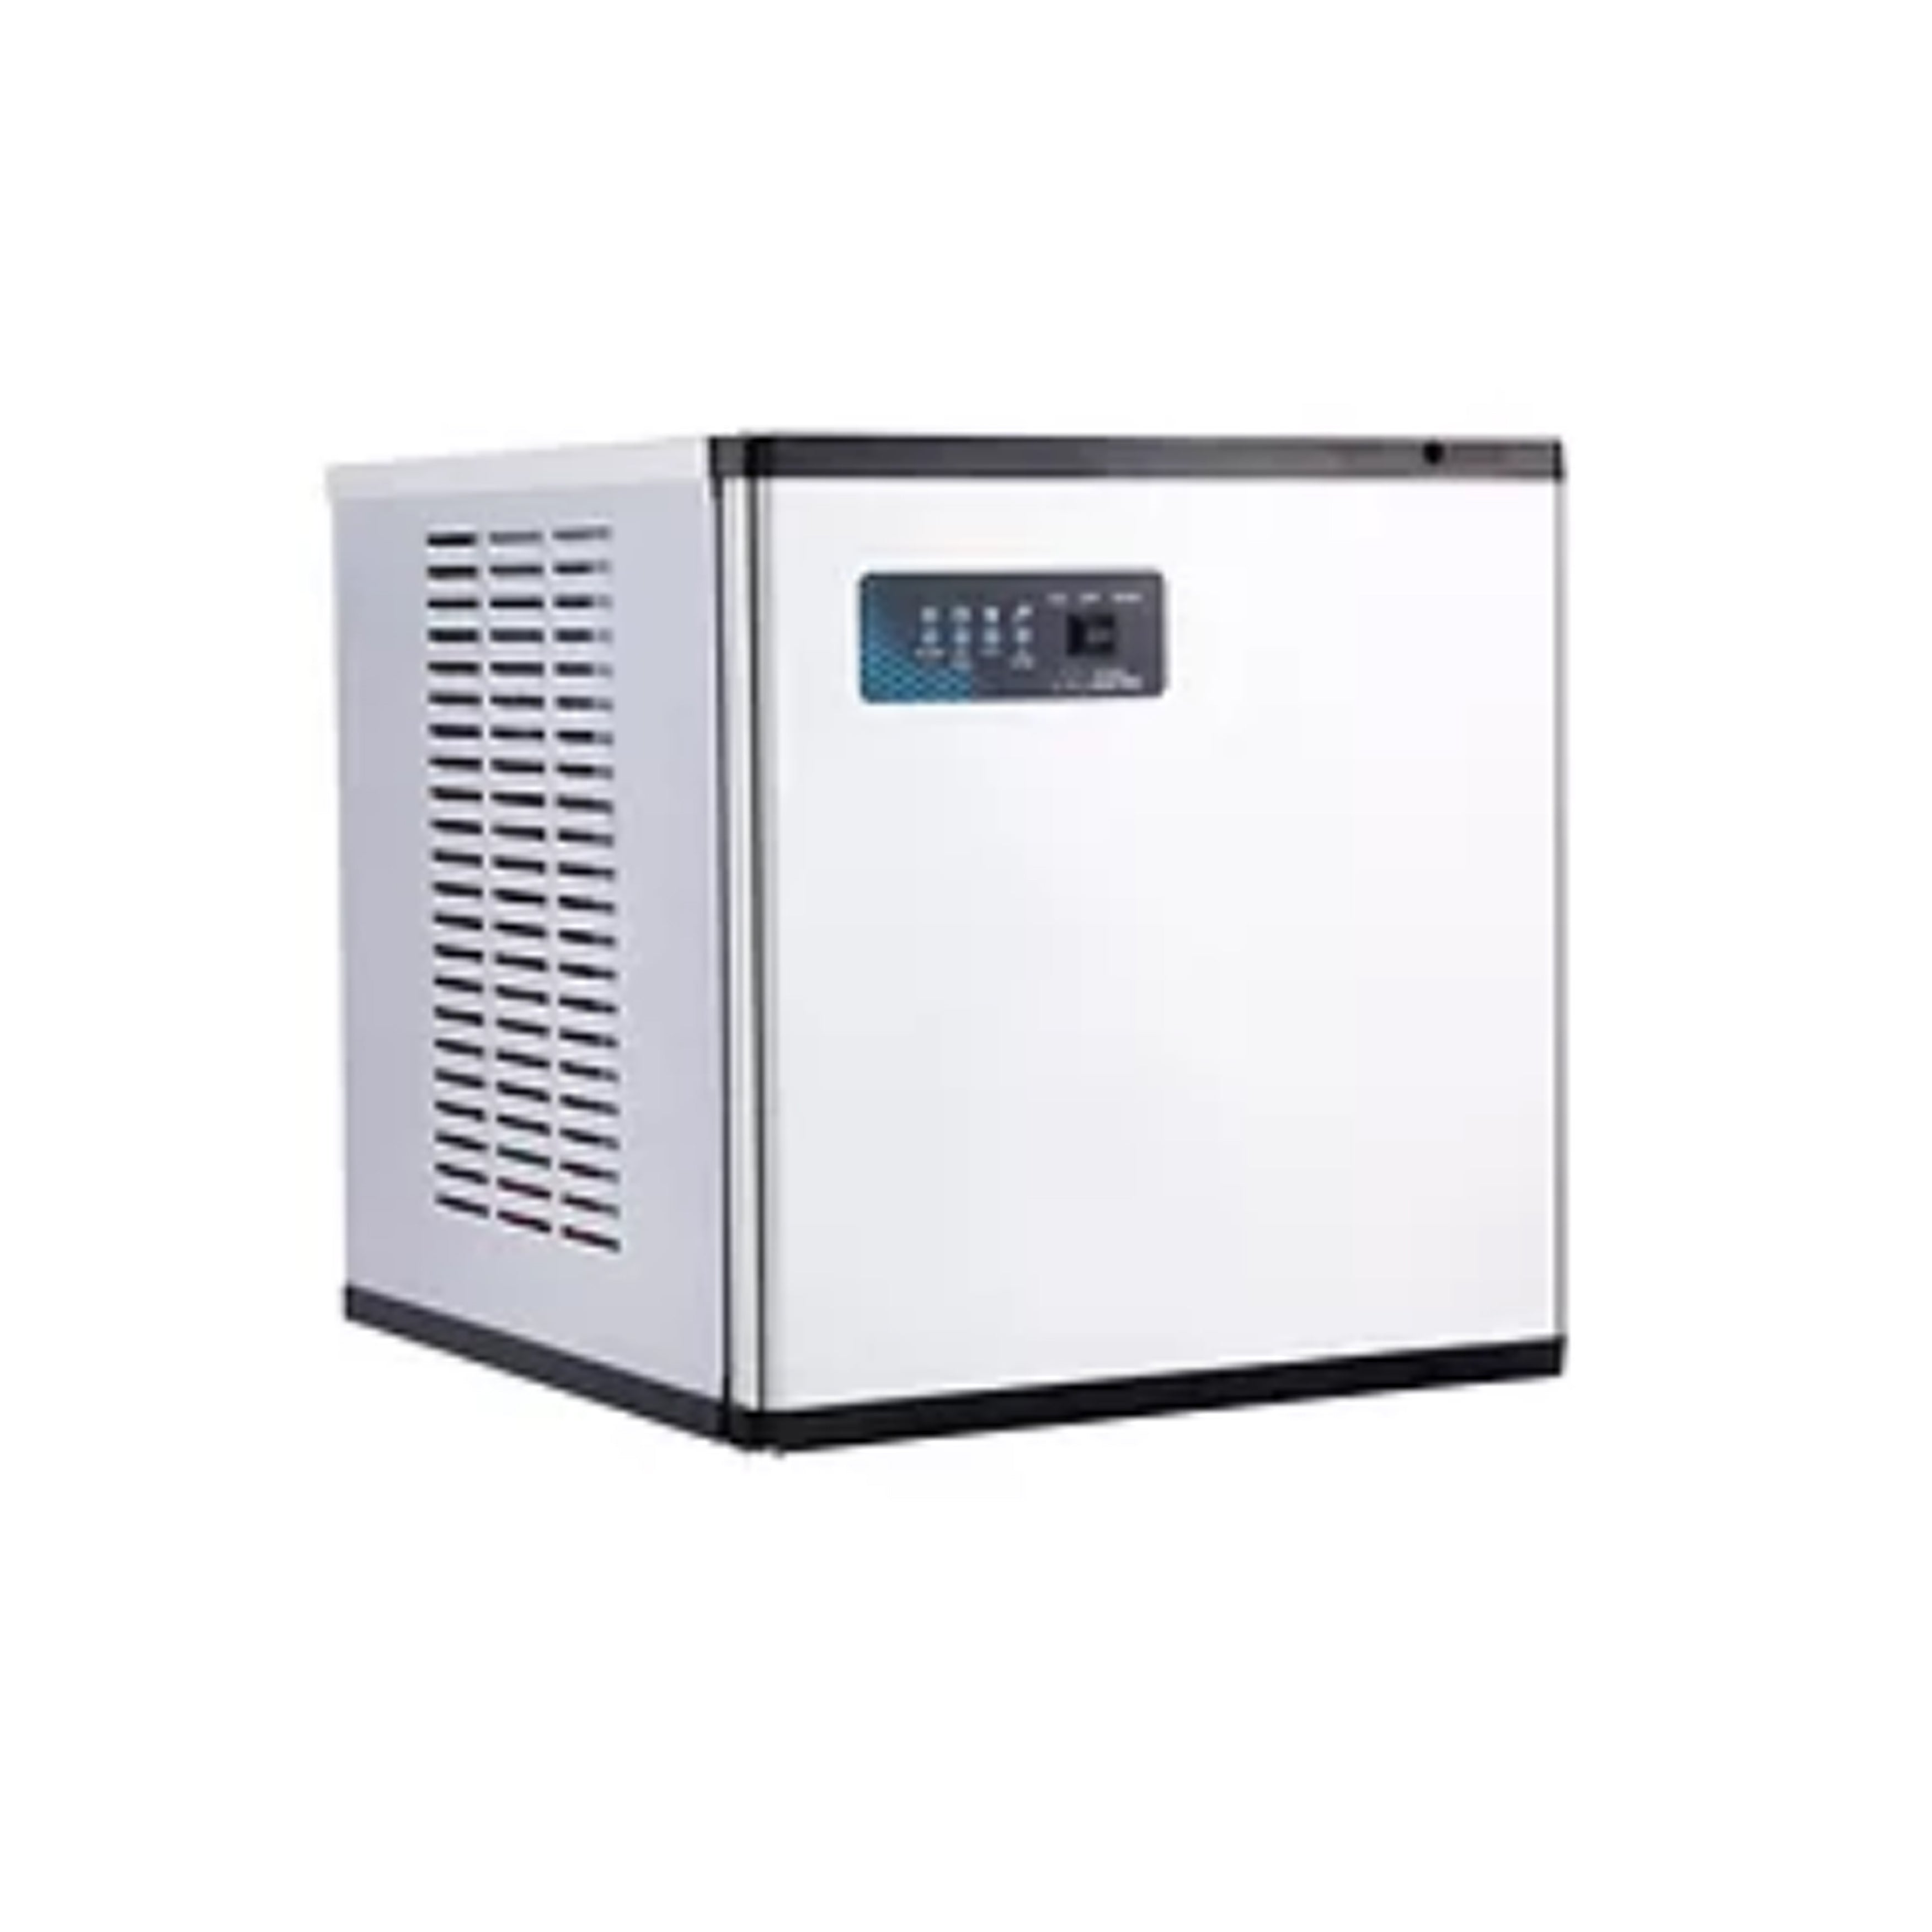 Icetro - IM-0550-AC, Commercial 551lbs Modular Air Cooled Ice Machine Half Ice Cube Maker